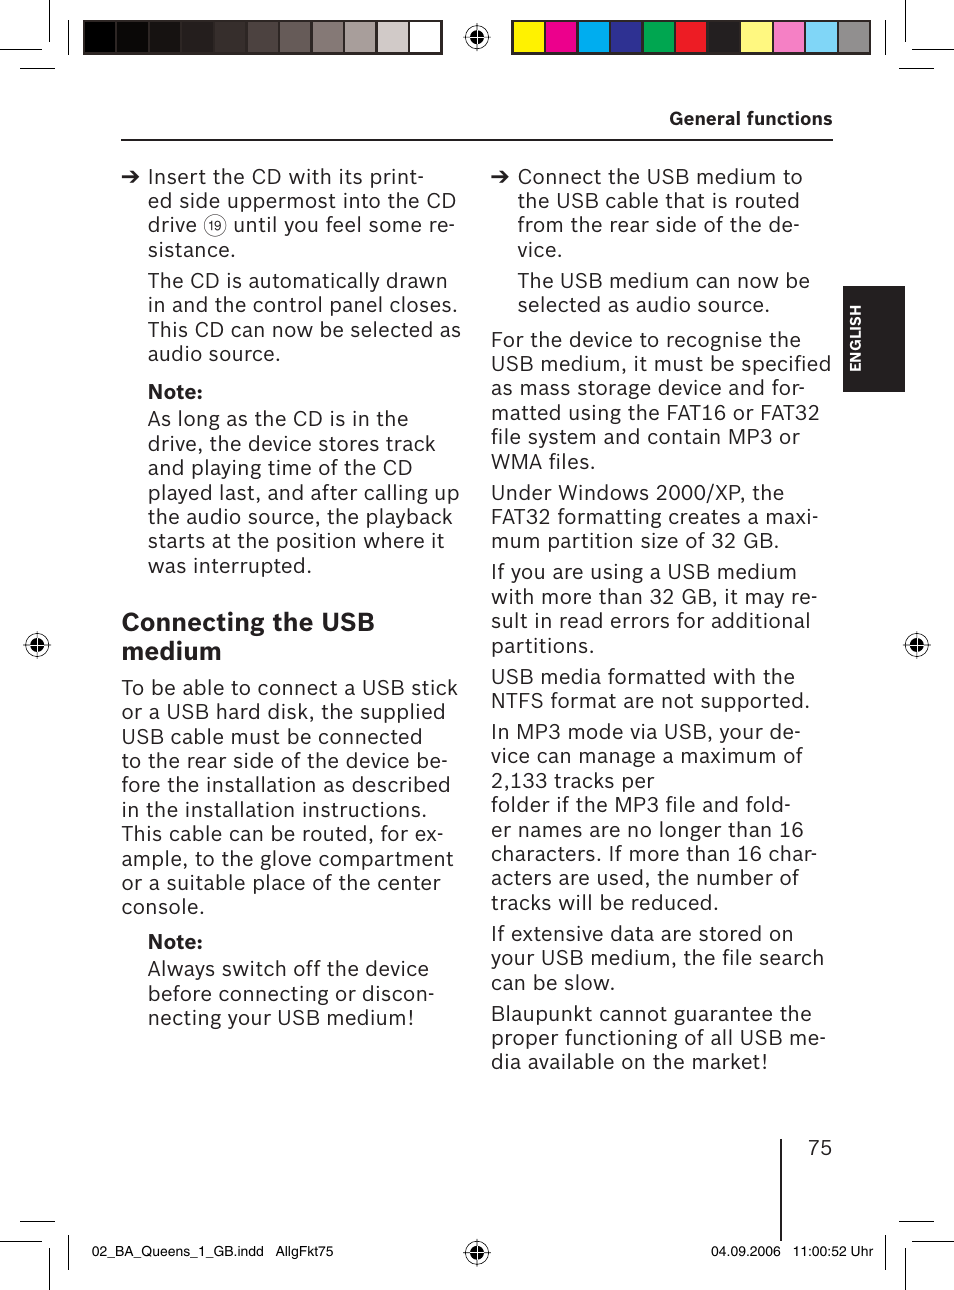 Connecting the usb medium | Blaupunkt QUEENS MP56 7 646 583 310 User Manual  | Page 10 / 67